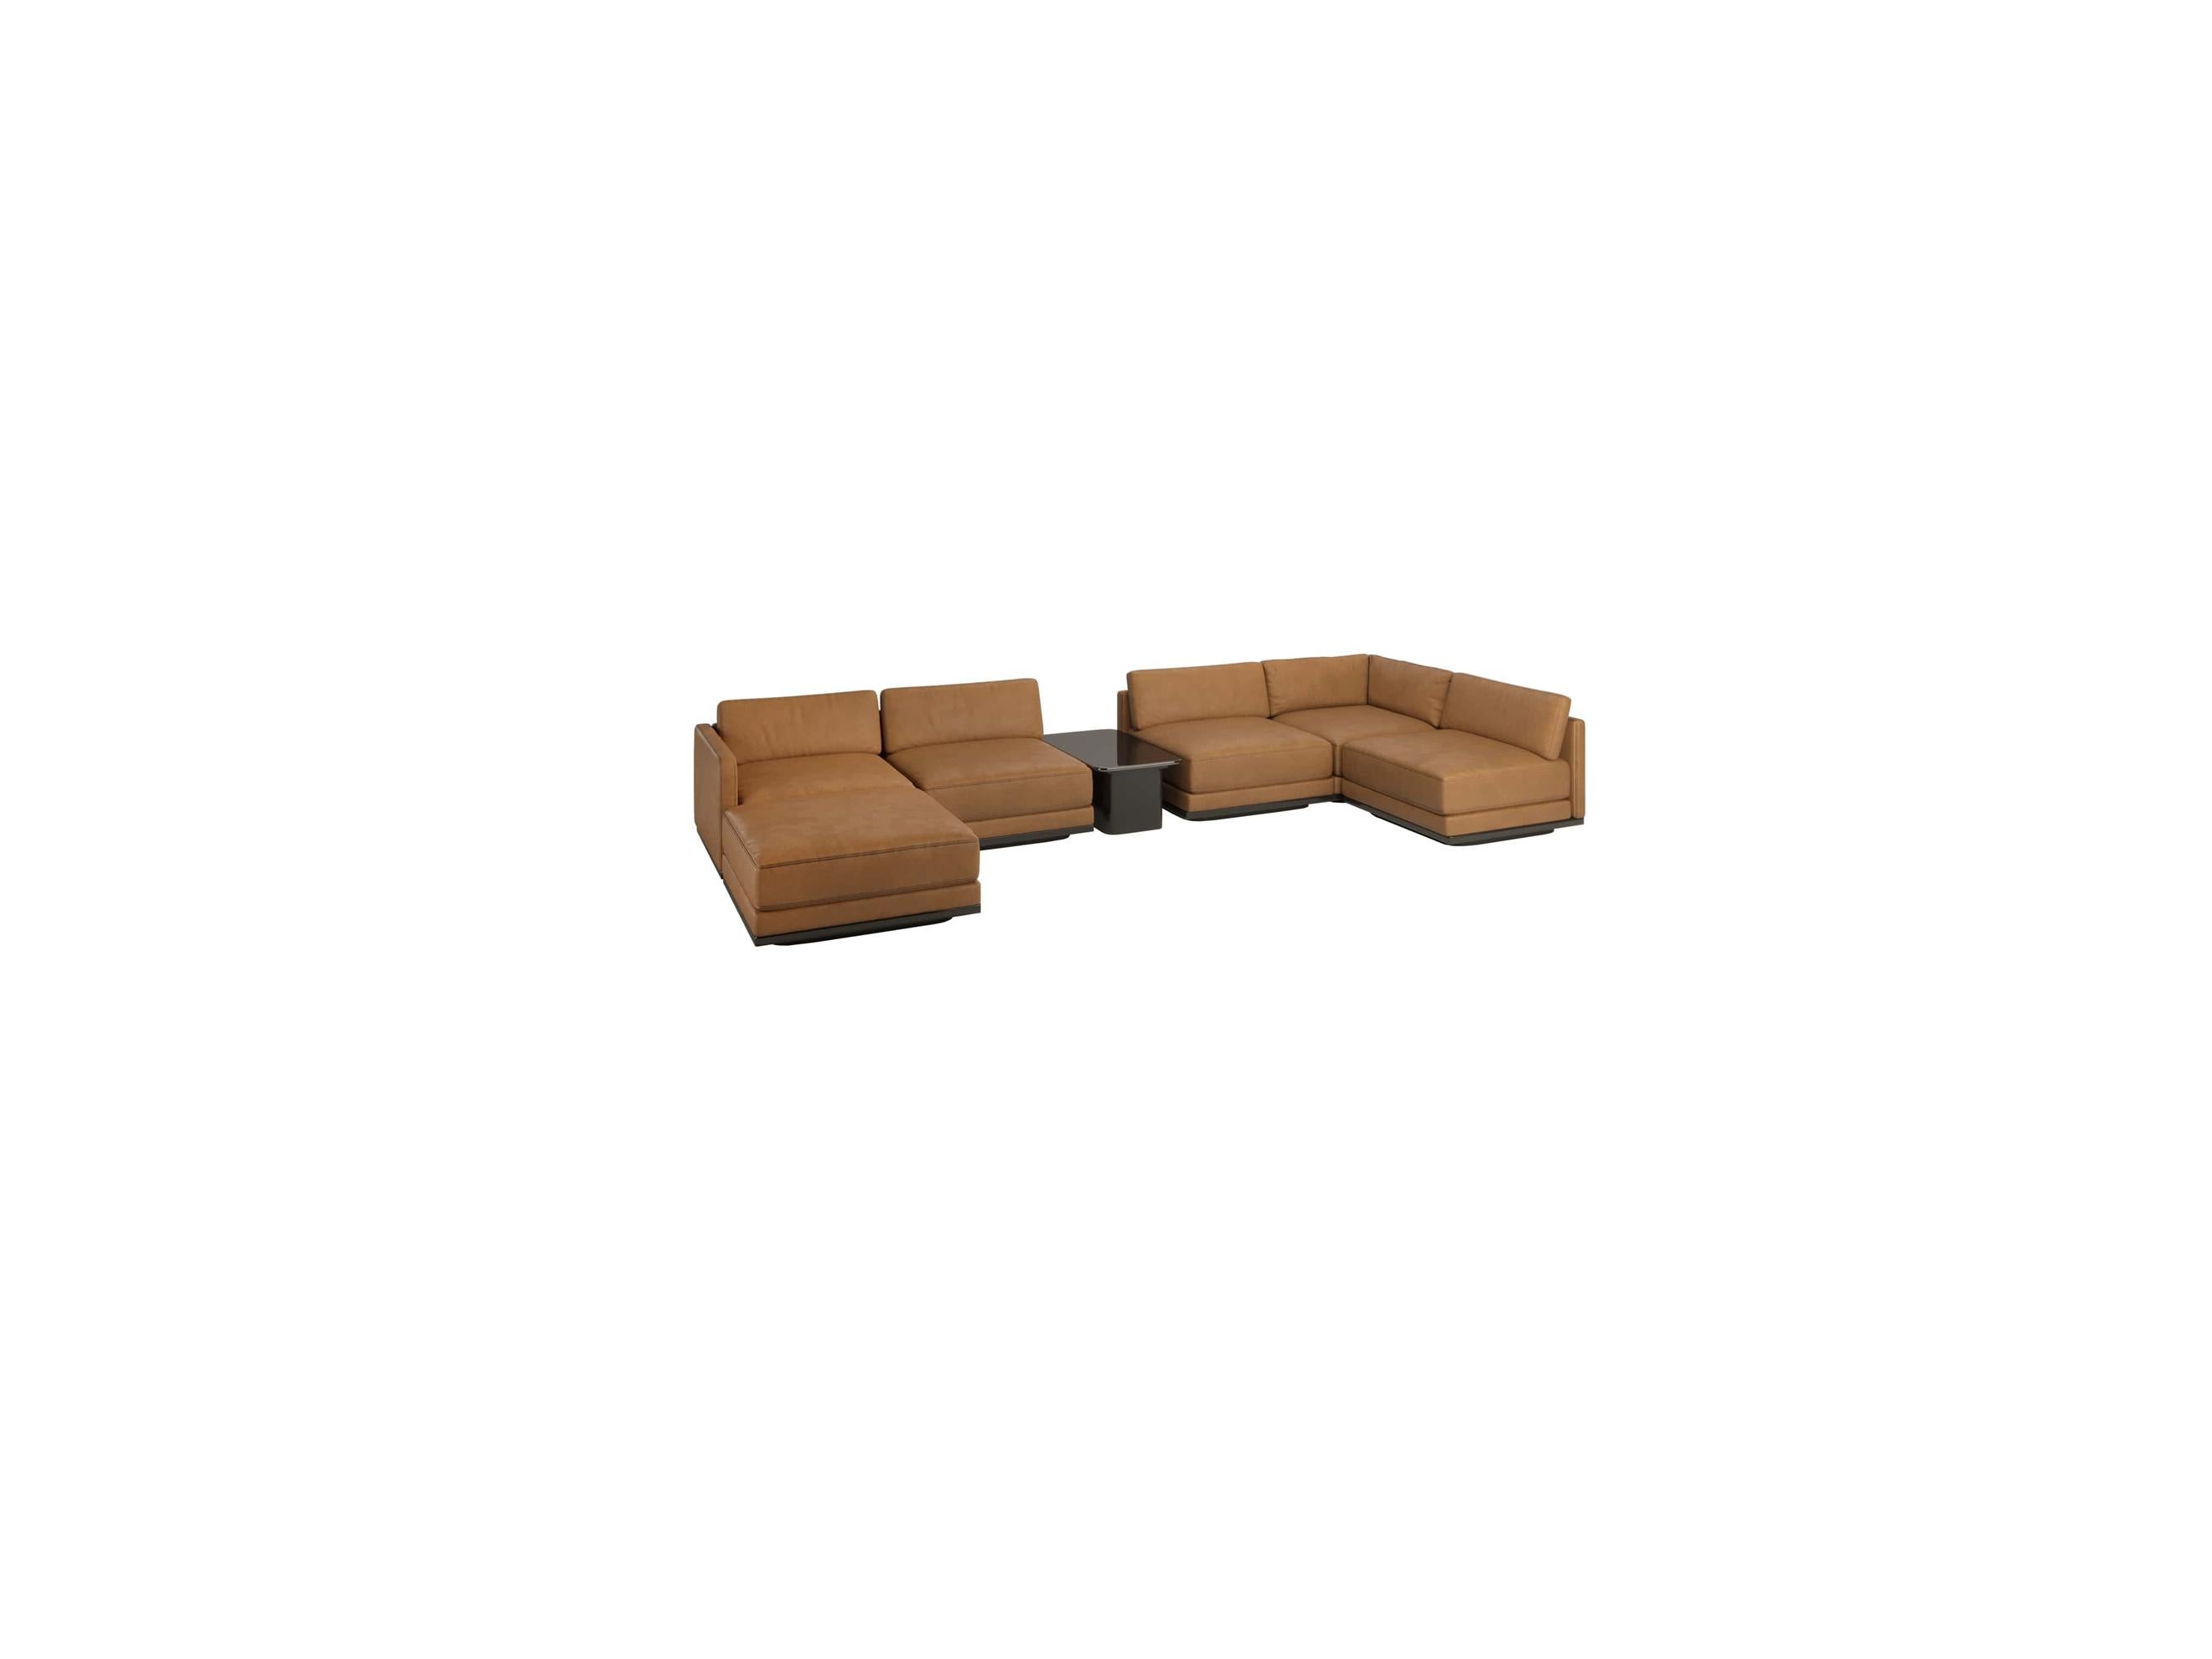 Portuguese Master Modular Sofa, Ash/Beech Plinth with Lacquered Finish For Sale